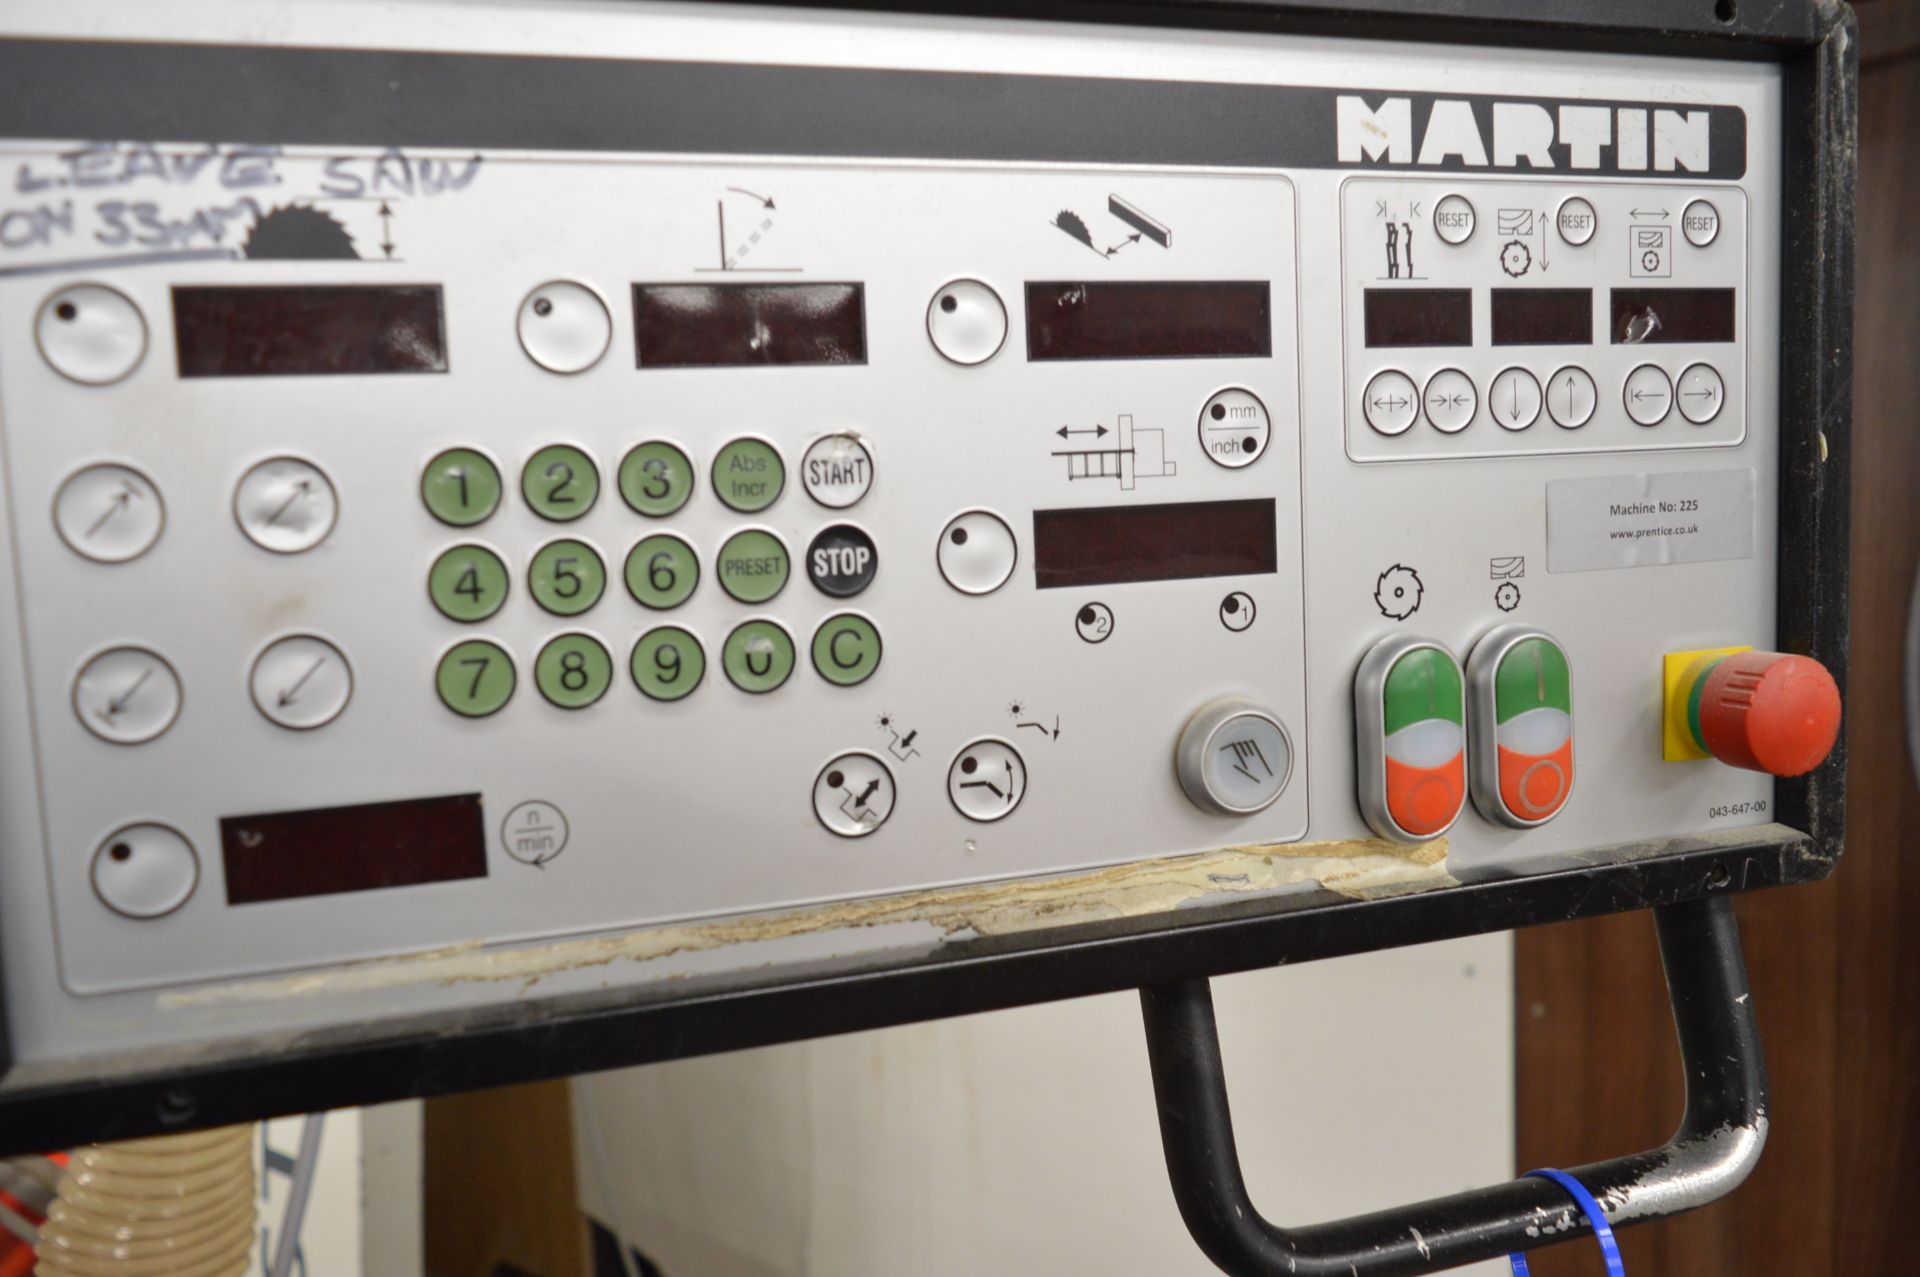 Martin T73 automatic sliding panel saw, Serial No. V460989 (2006), Saw Blade. Min 250mm / Max. - Image 3 of 7